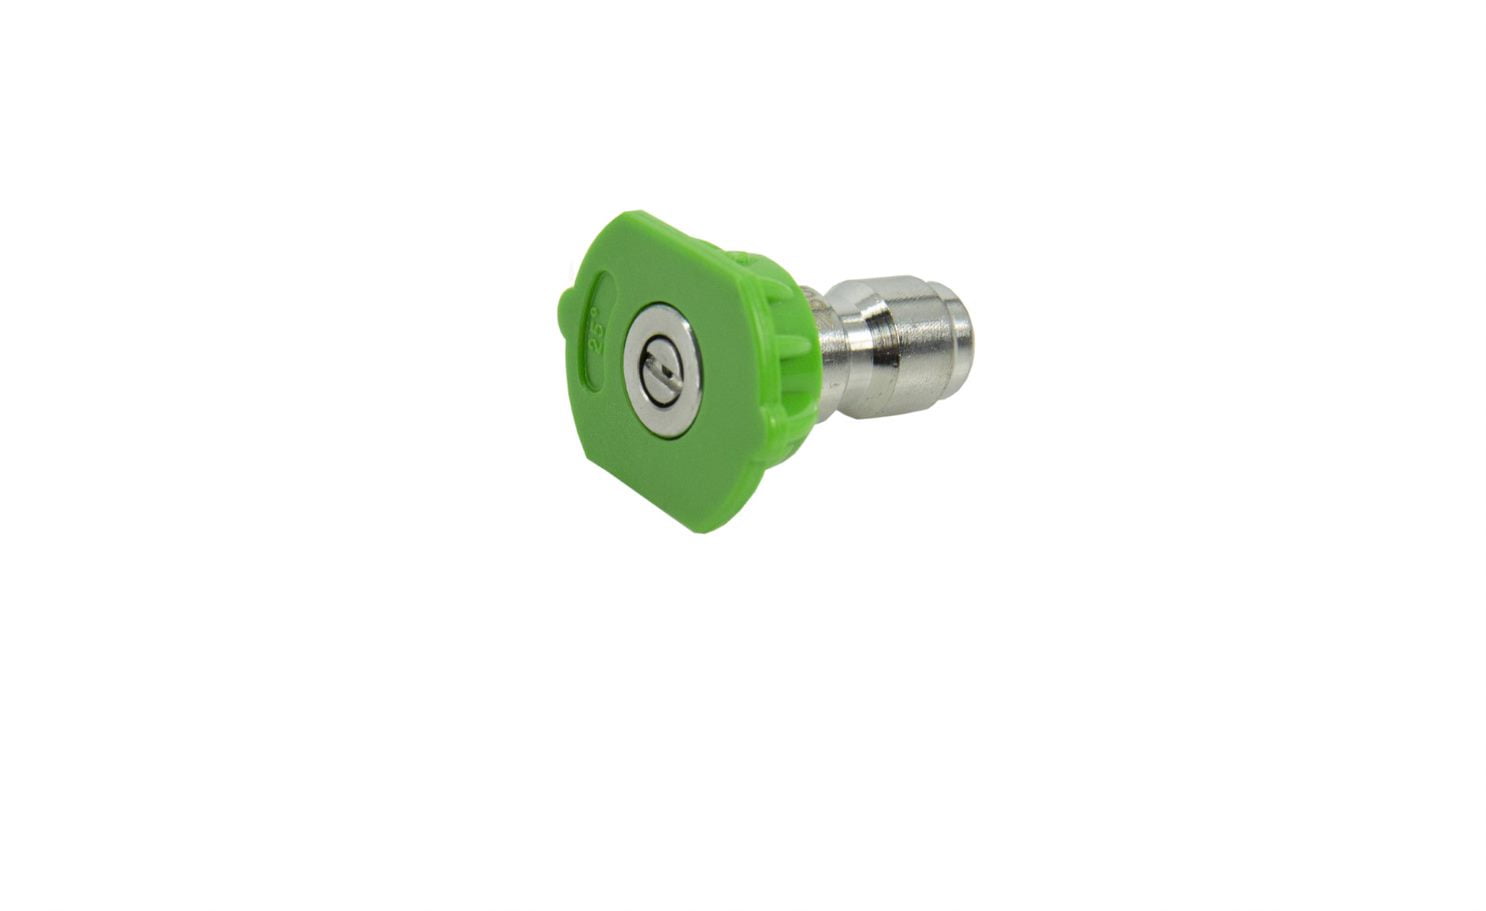 Hyper Tough Replacement 25 Degree Pressure Washer Nozzle, Quick Connect